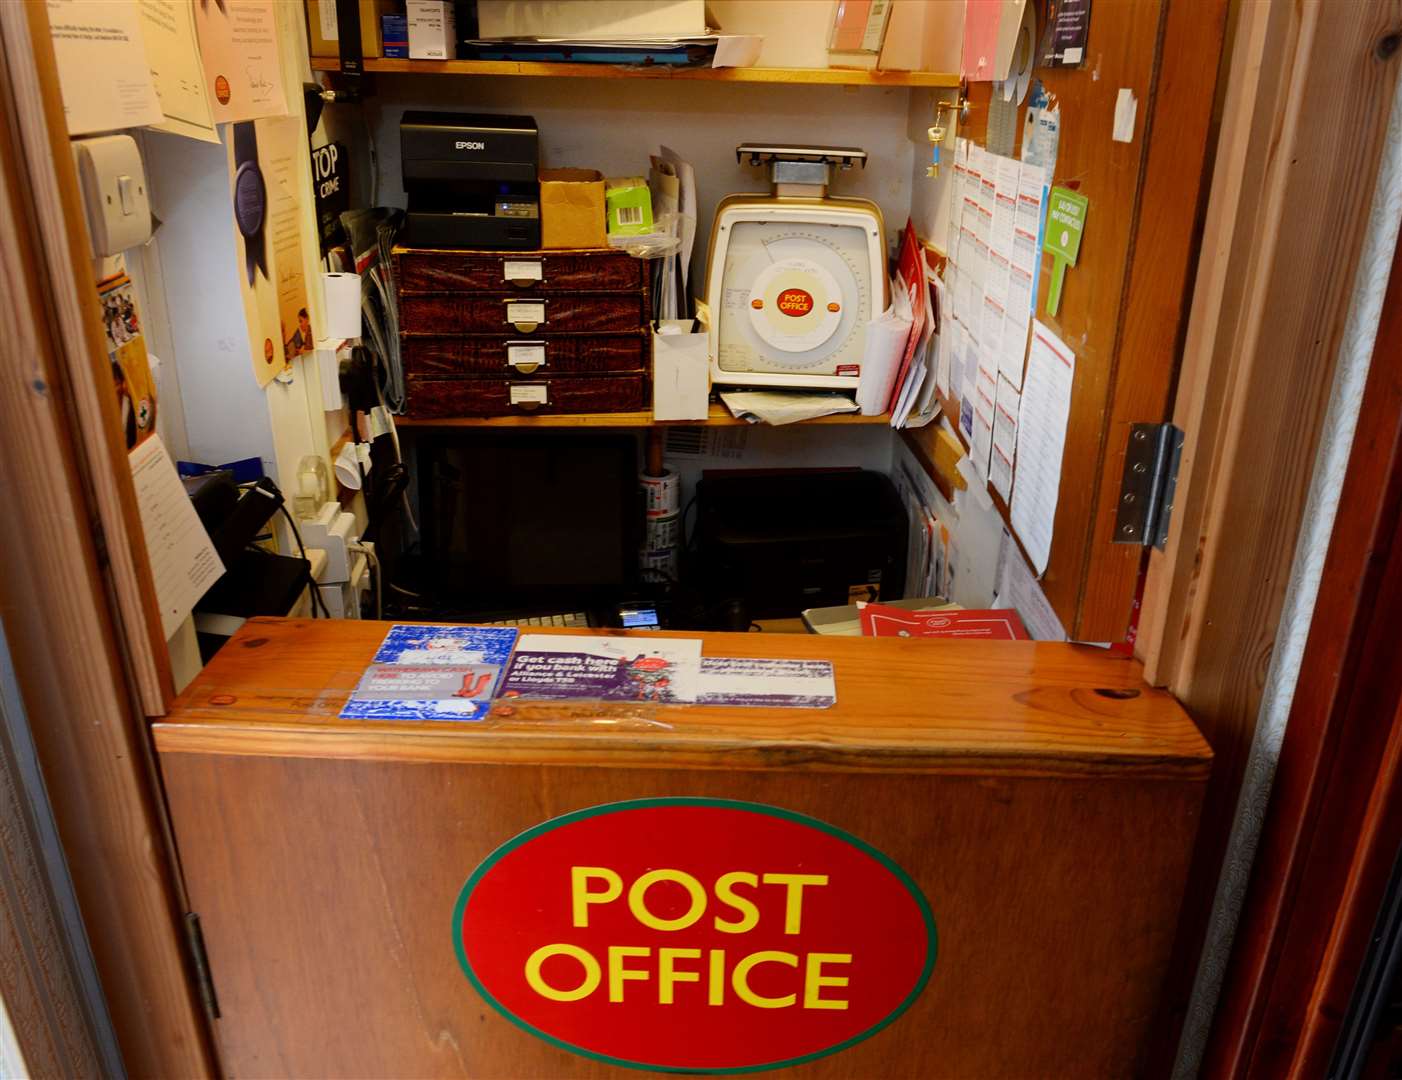 Dores Post Office operated out of a broom cupboard.